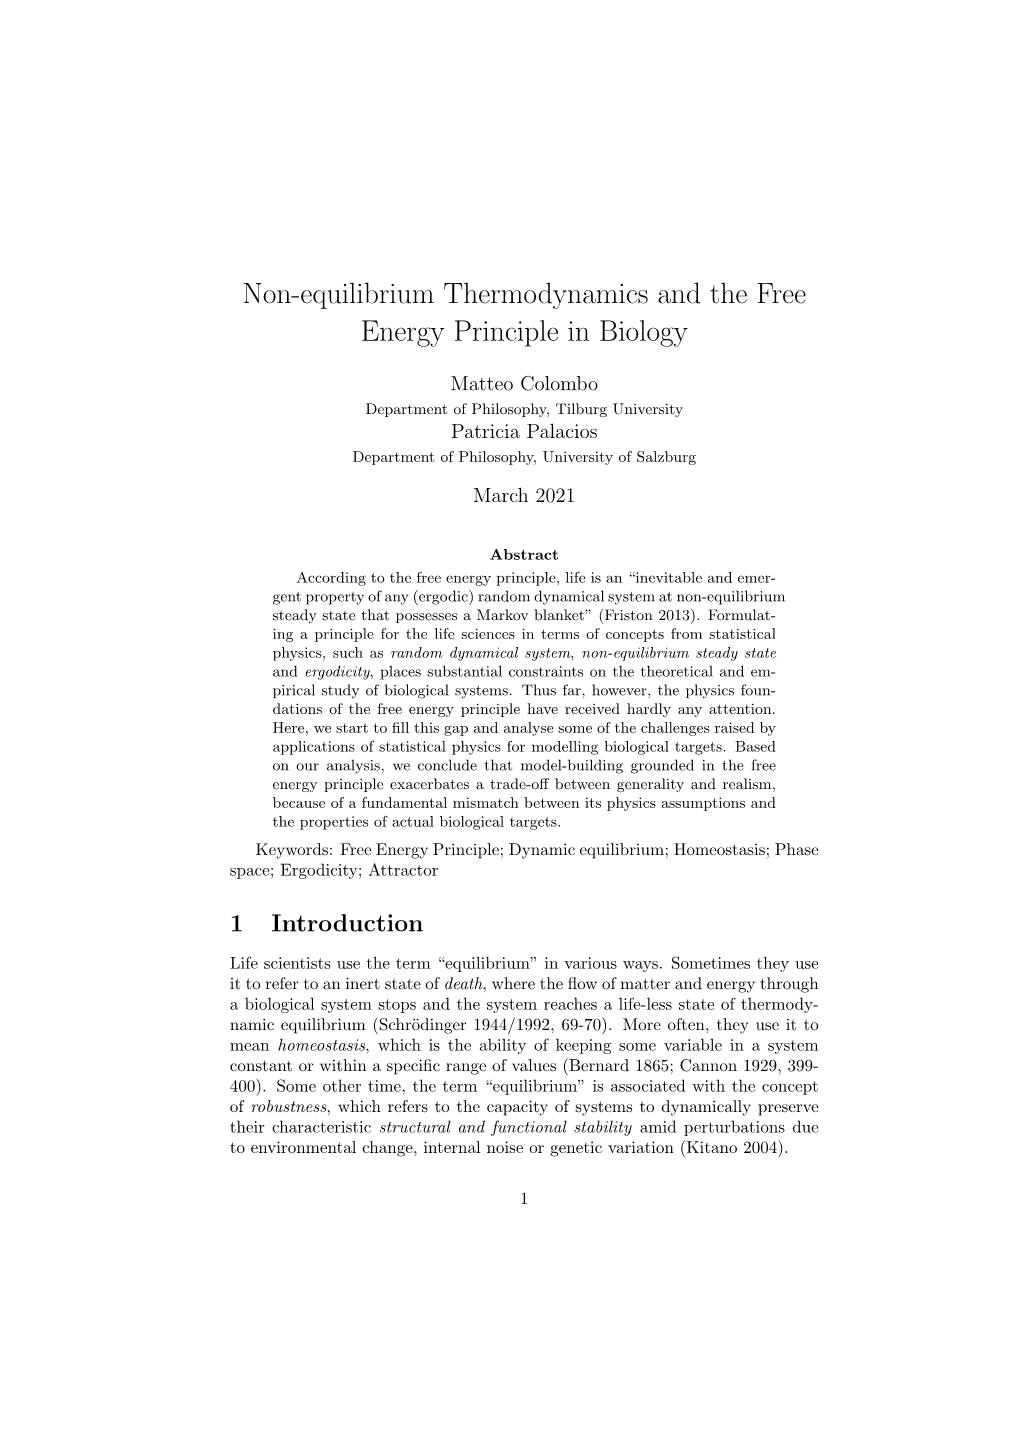 Non-Equilibrium Thermodynamics and the Free Energy Principle in Biology